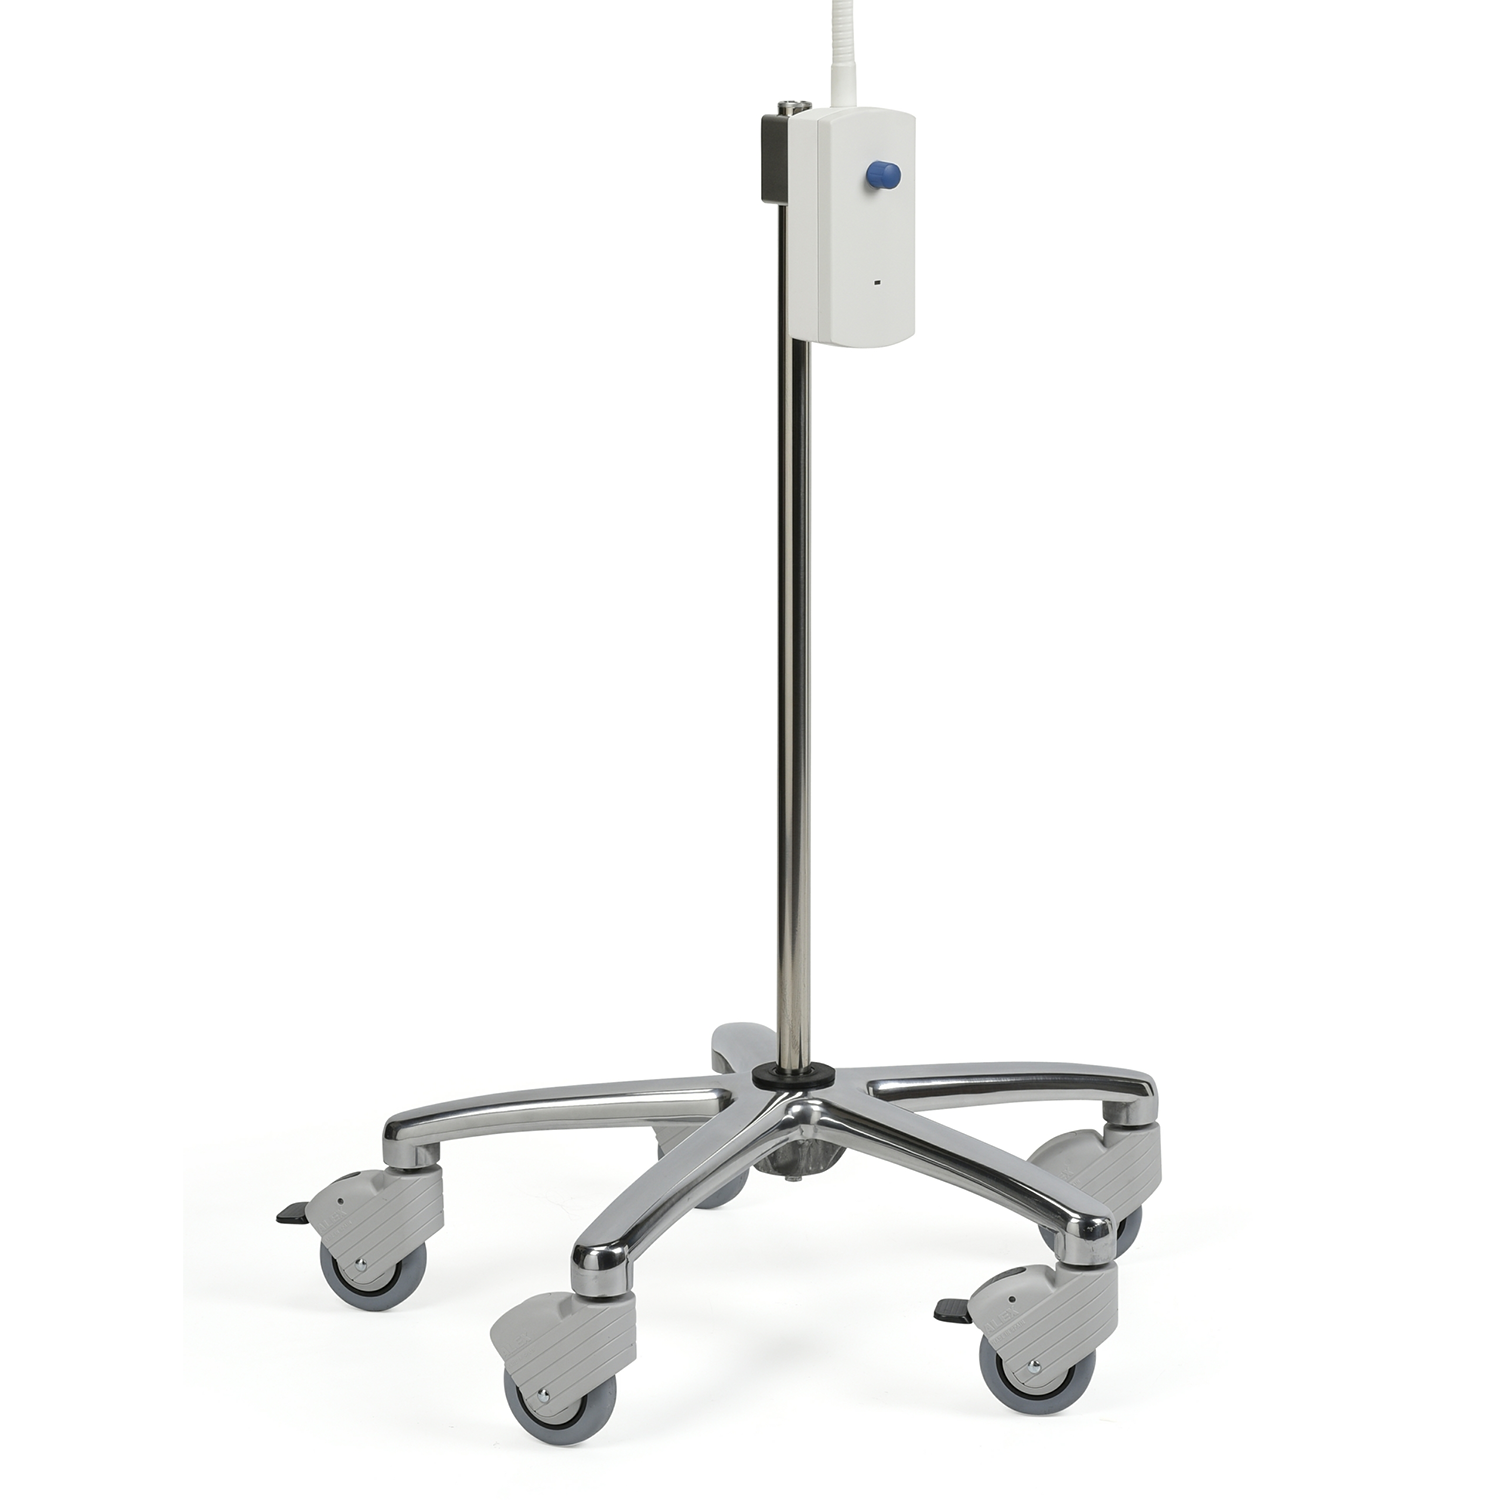 Universal Trolley for Flexi 3 & 10 lights – 2 Brakes